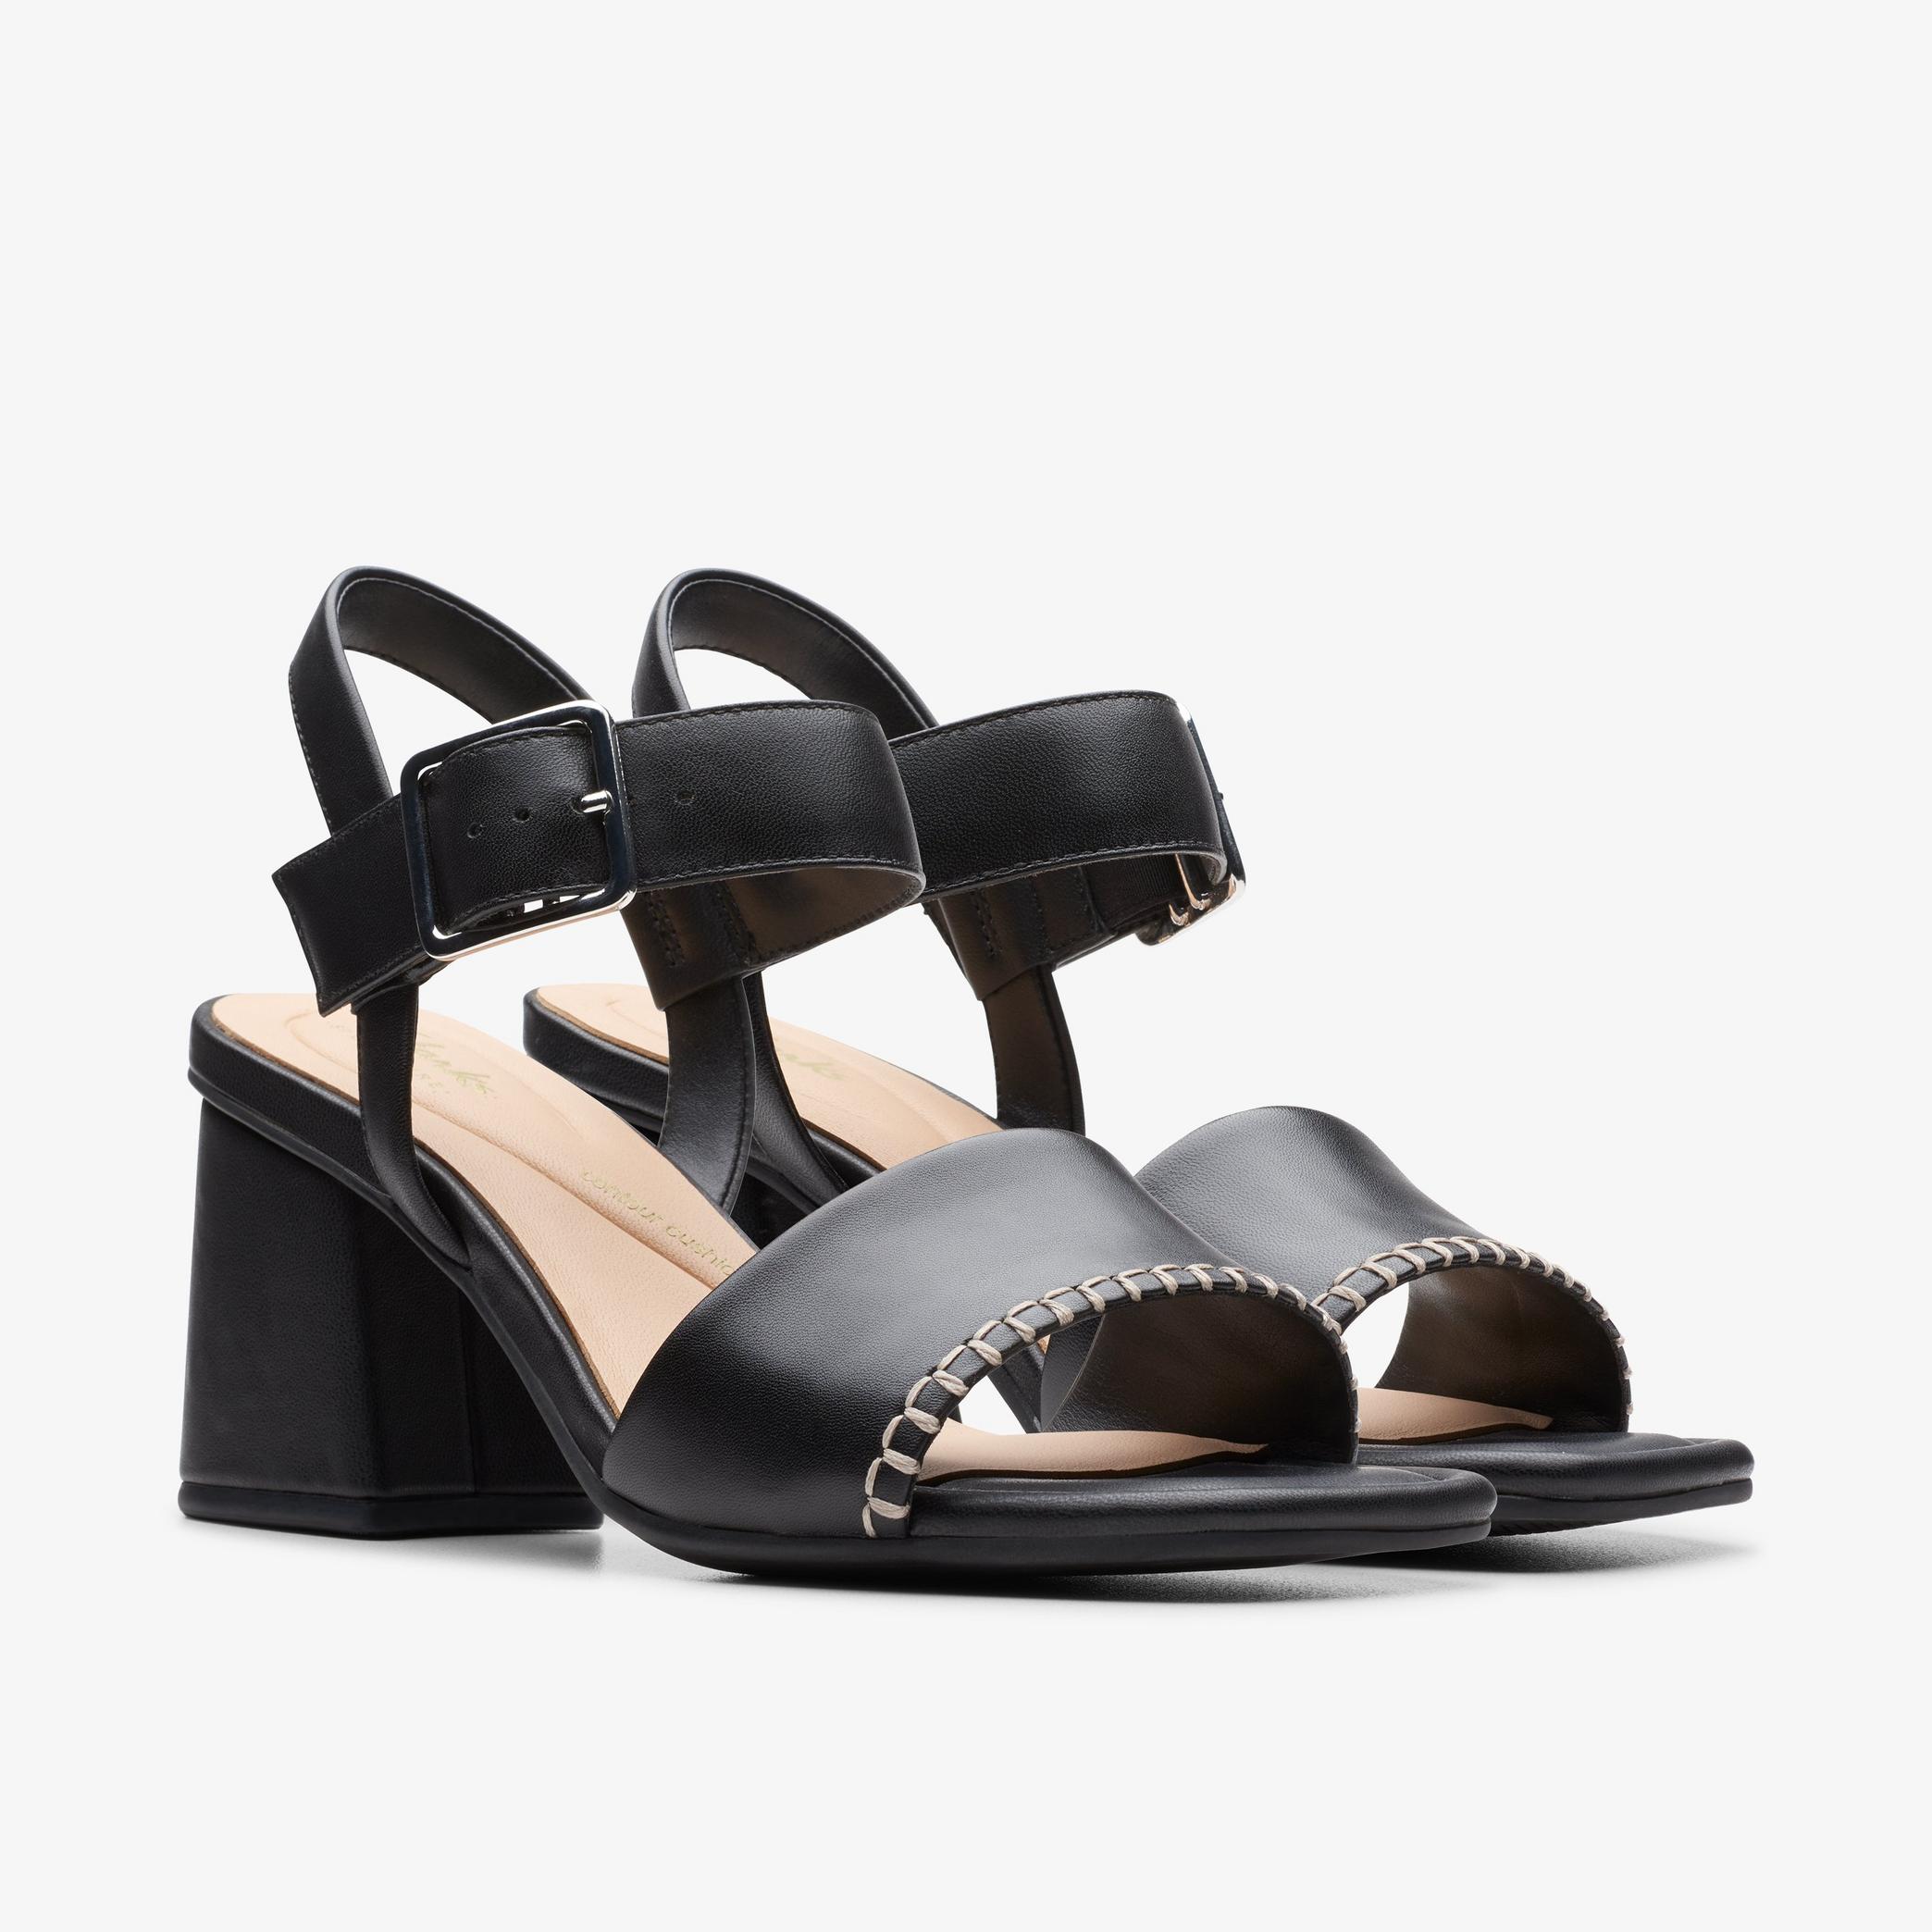 Siara65 Buckle Black Leather Heeled Sandals, view 4 of 6